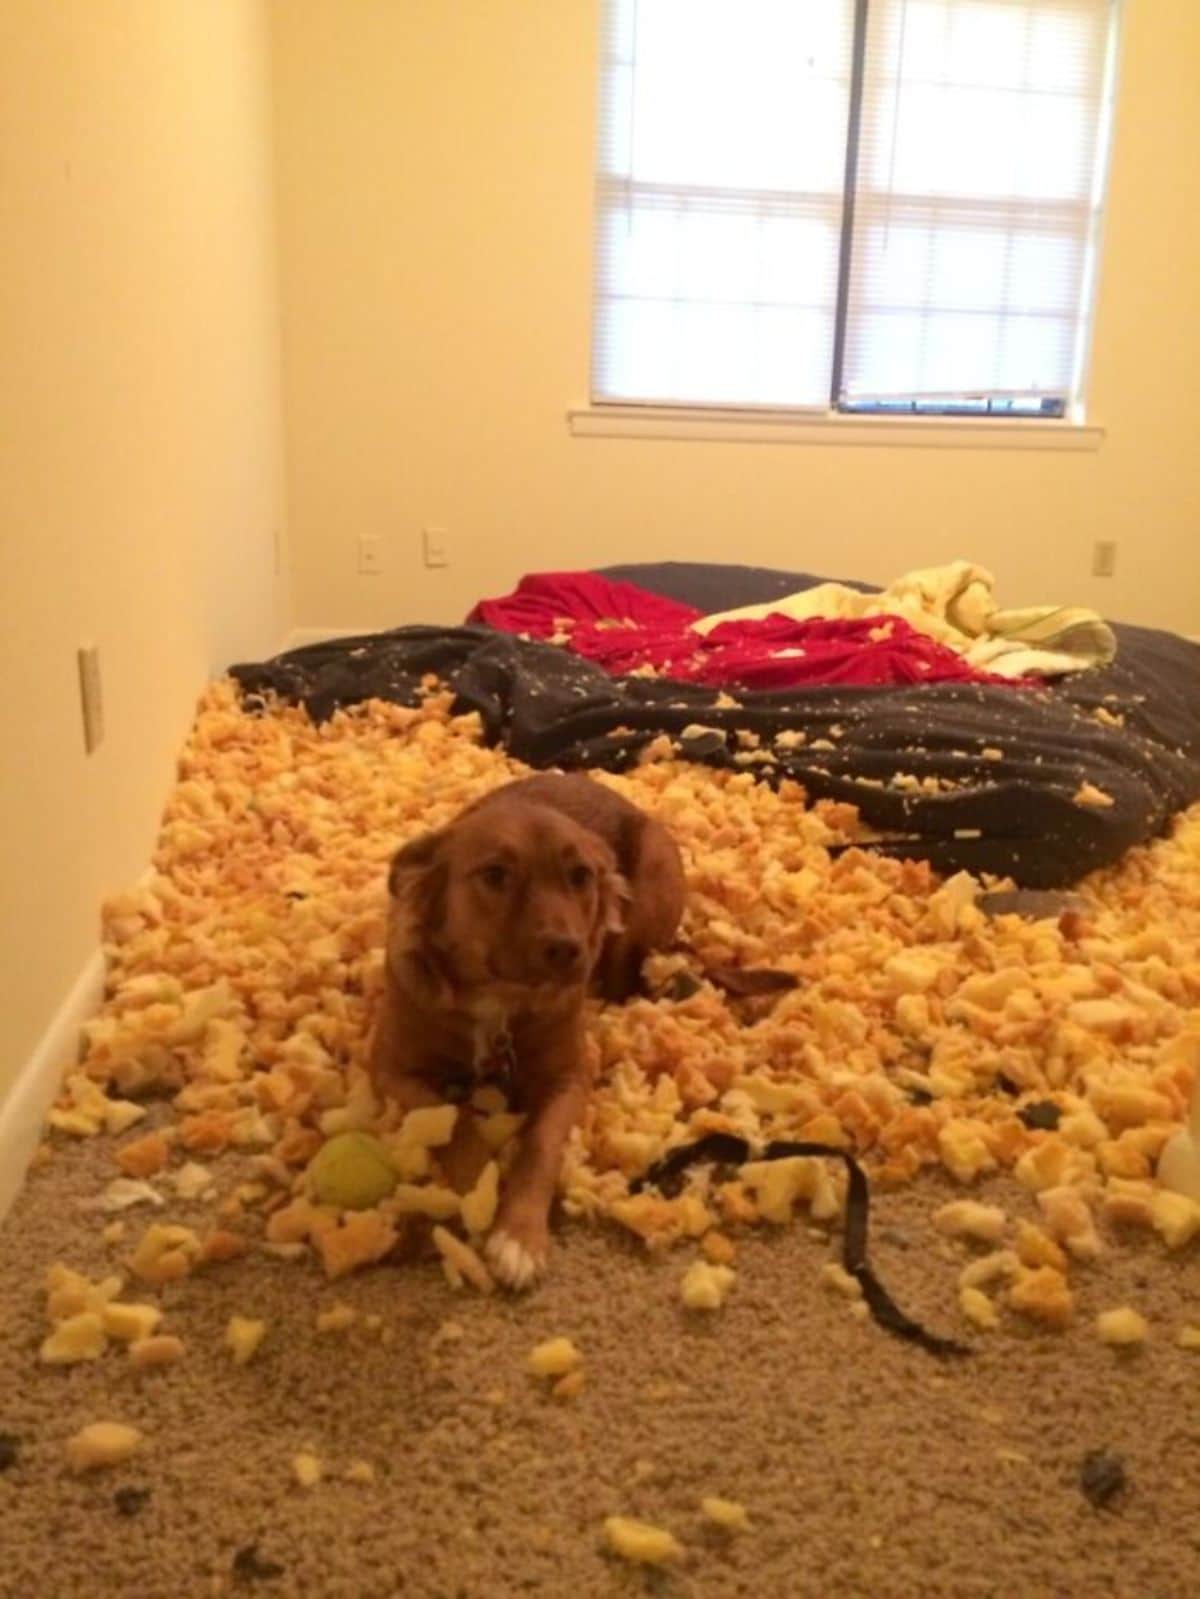 brown dog laying on a pile of orange stuffing from a destroyed bed